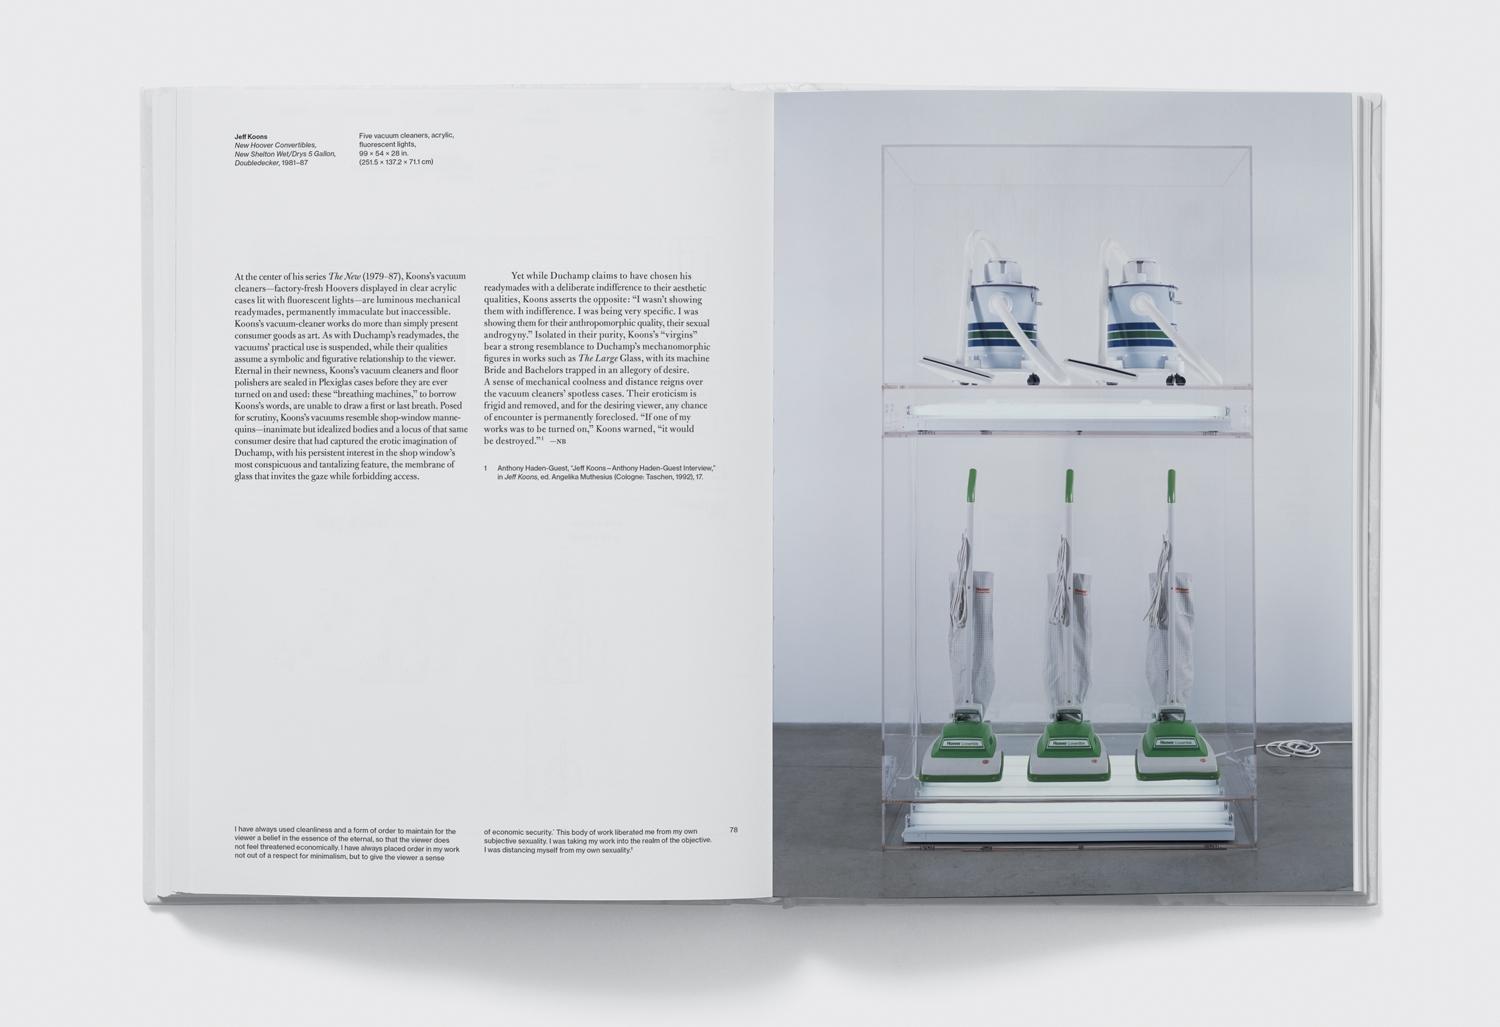 The first book to explore two of the biggest names in modern and contemporary art side by side, Marcel Duchamp and Jeff Koons
In the first half of the 20th century, Marcel Duchamp redefined what we consider art and what it means to be an